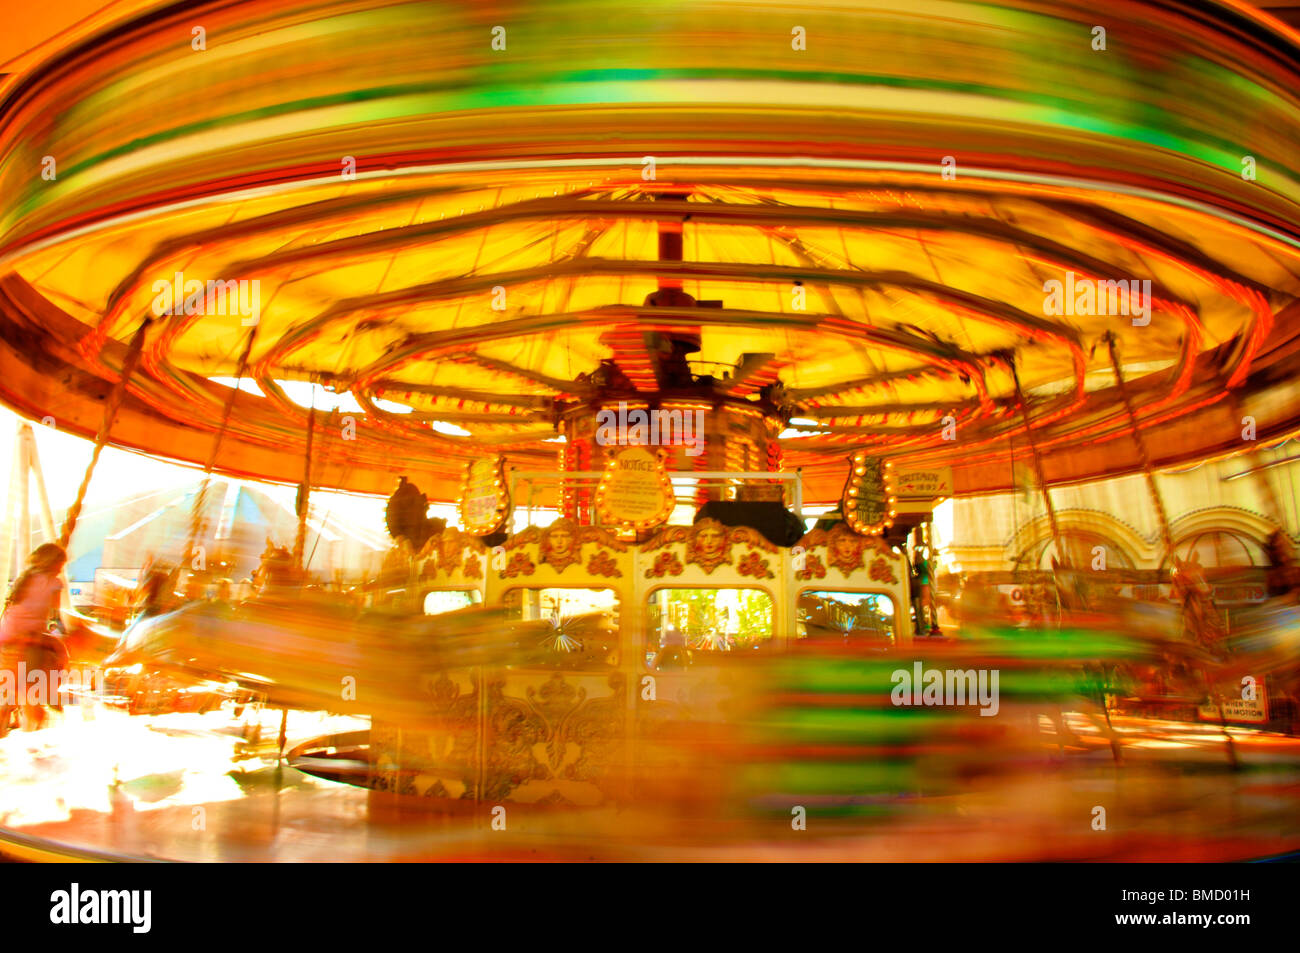 Merry go round with motion blur,Southport,UK Stock Photo